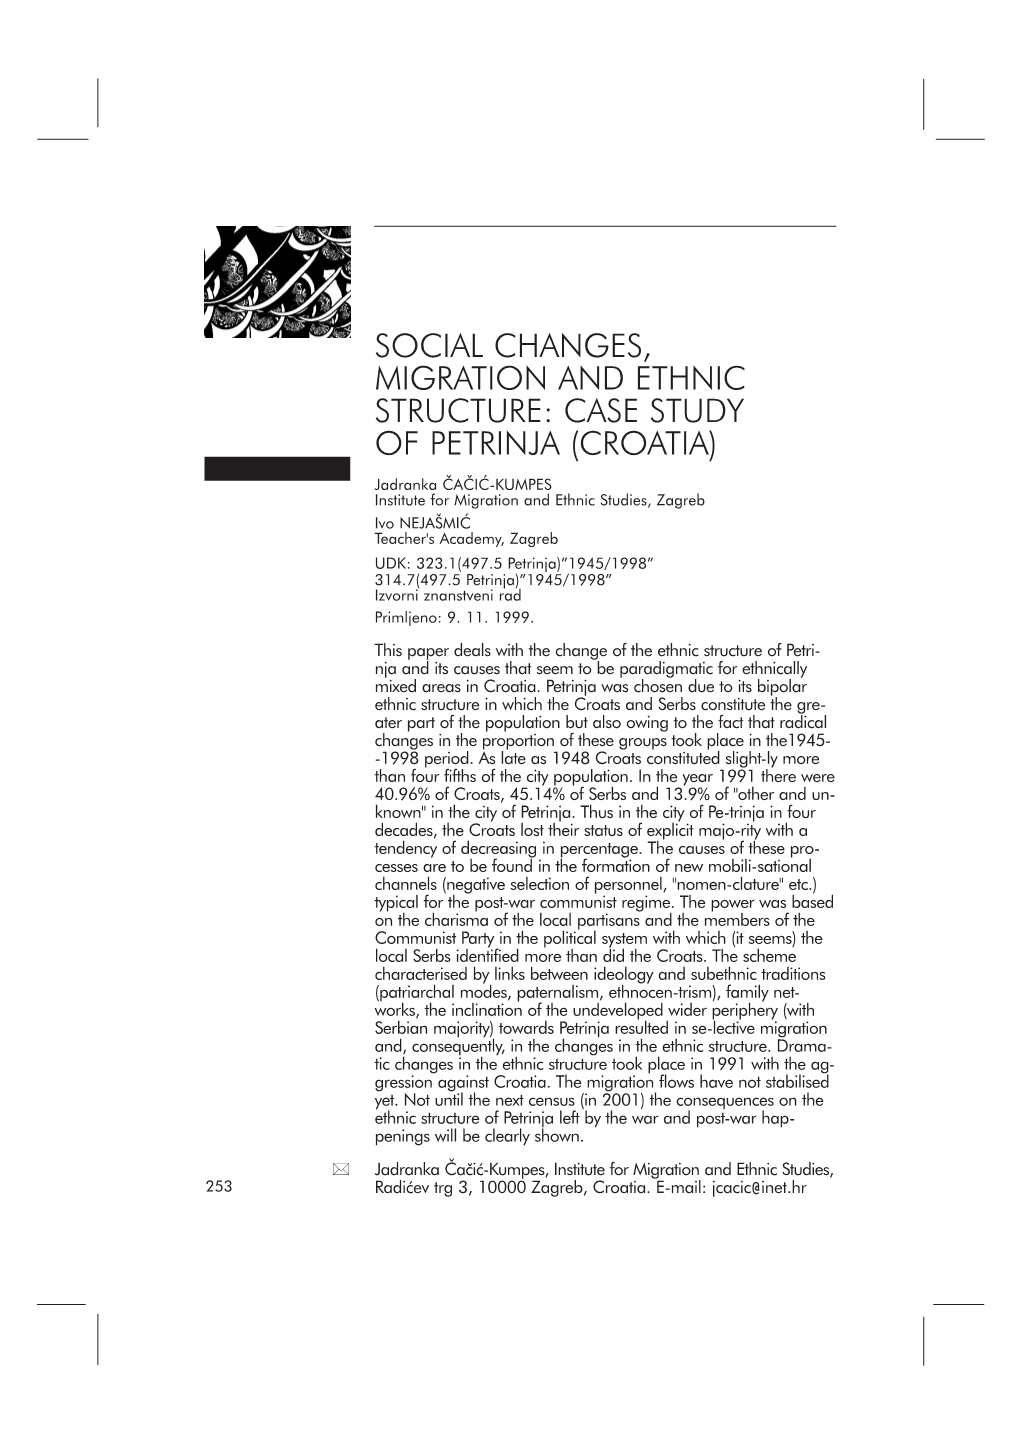 Social Changes, Migration and Ethnic Structure: Case Study of Petrinja